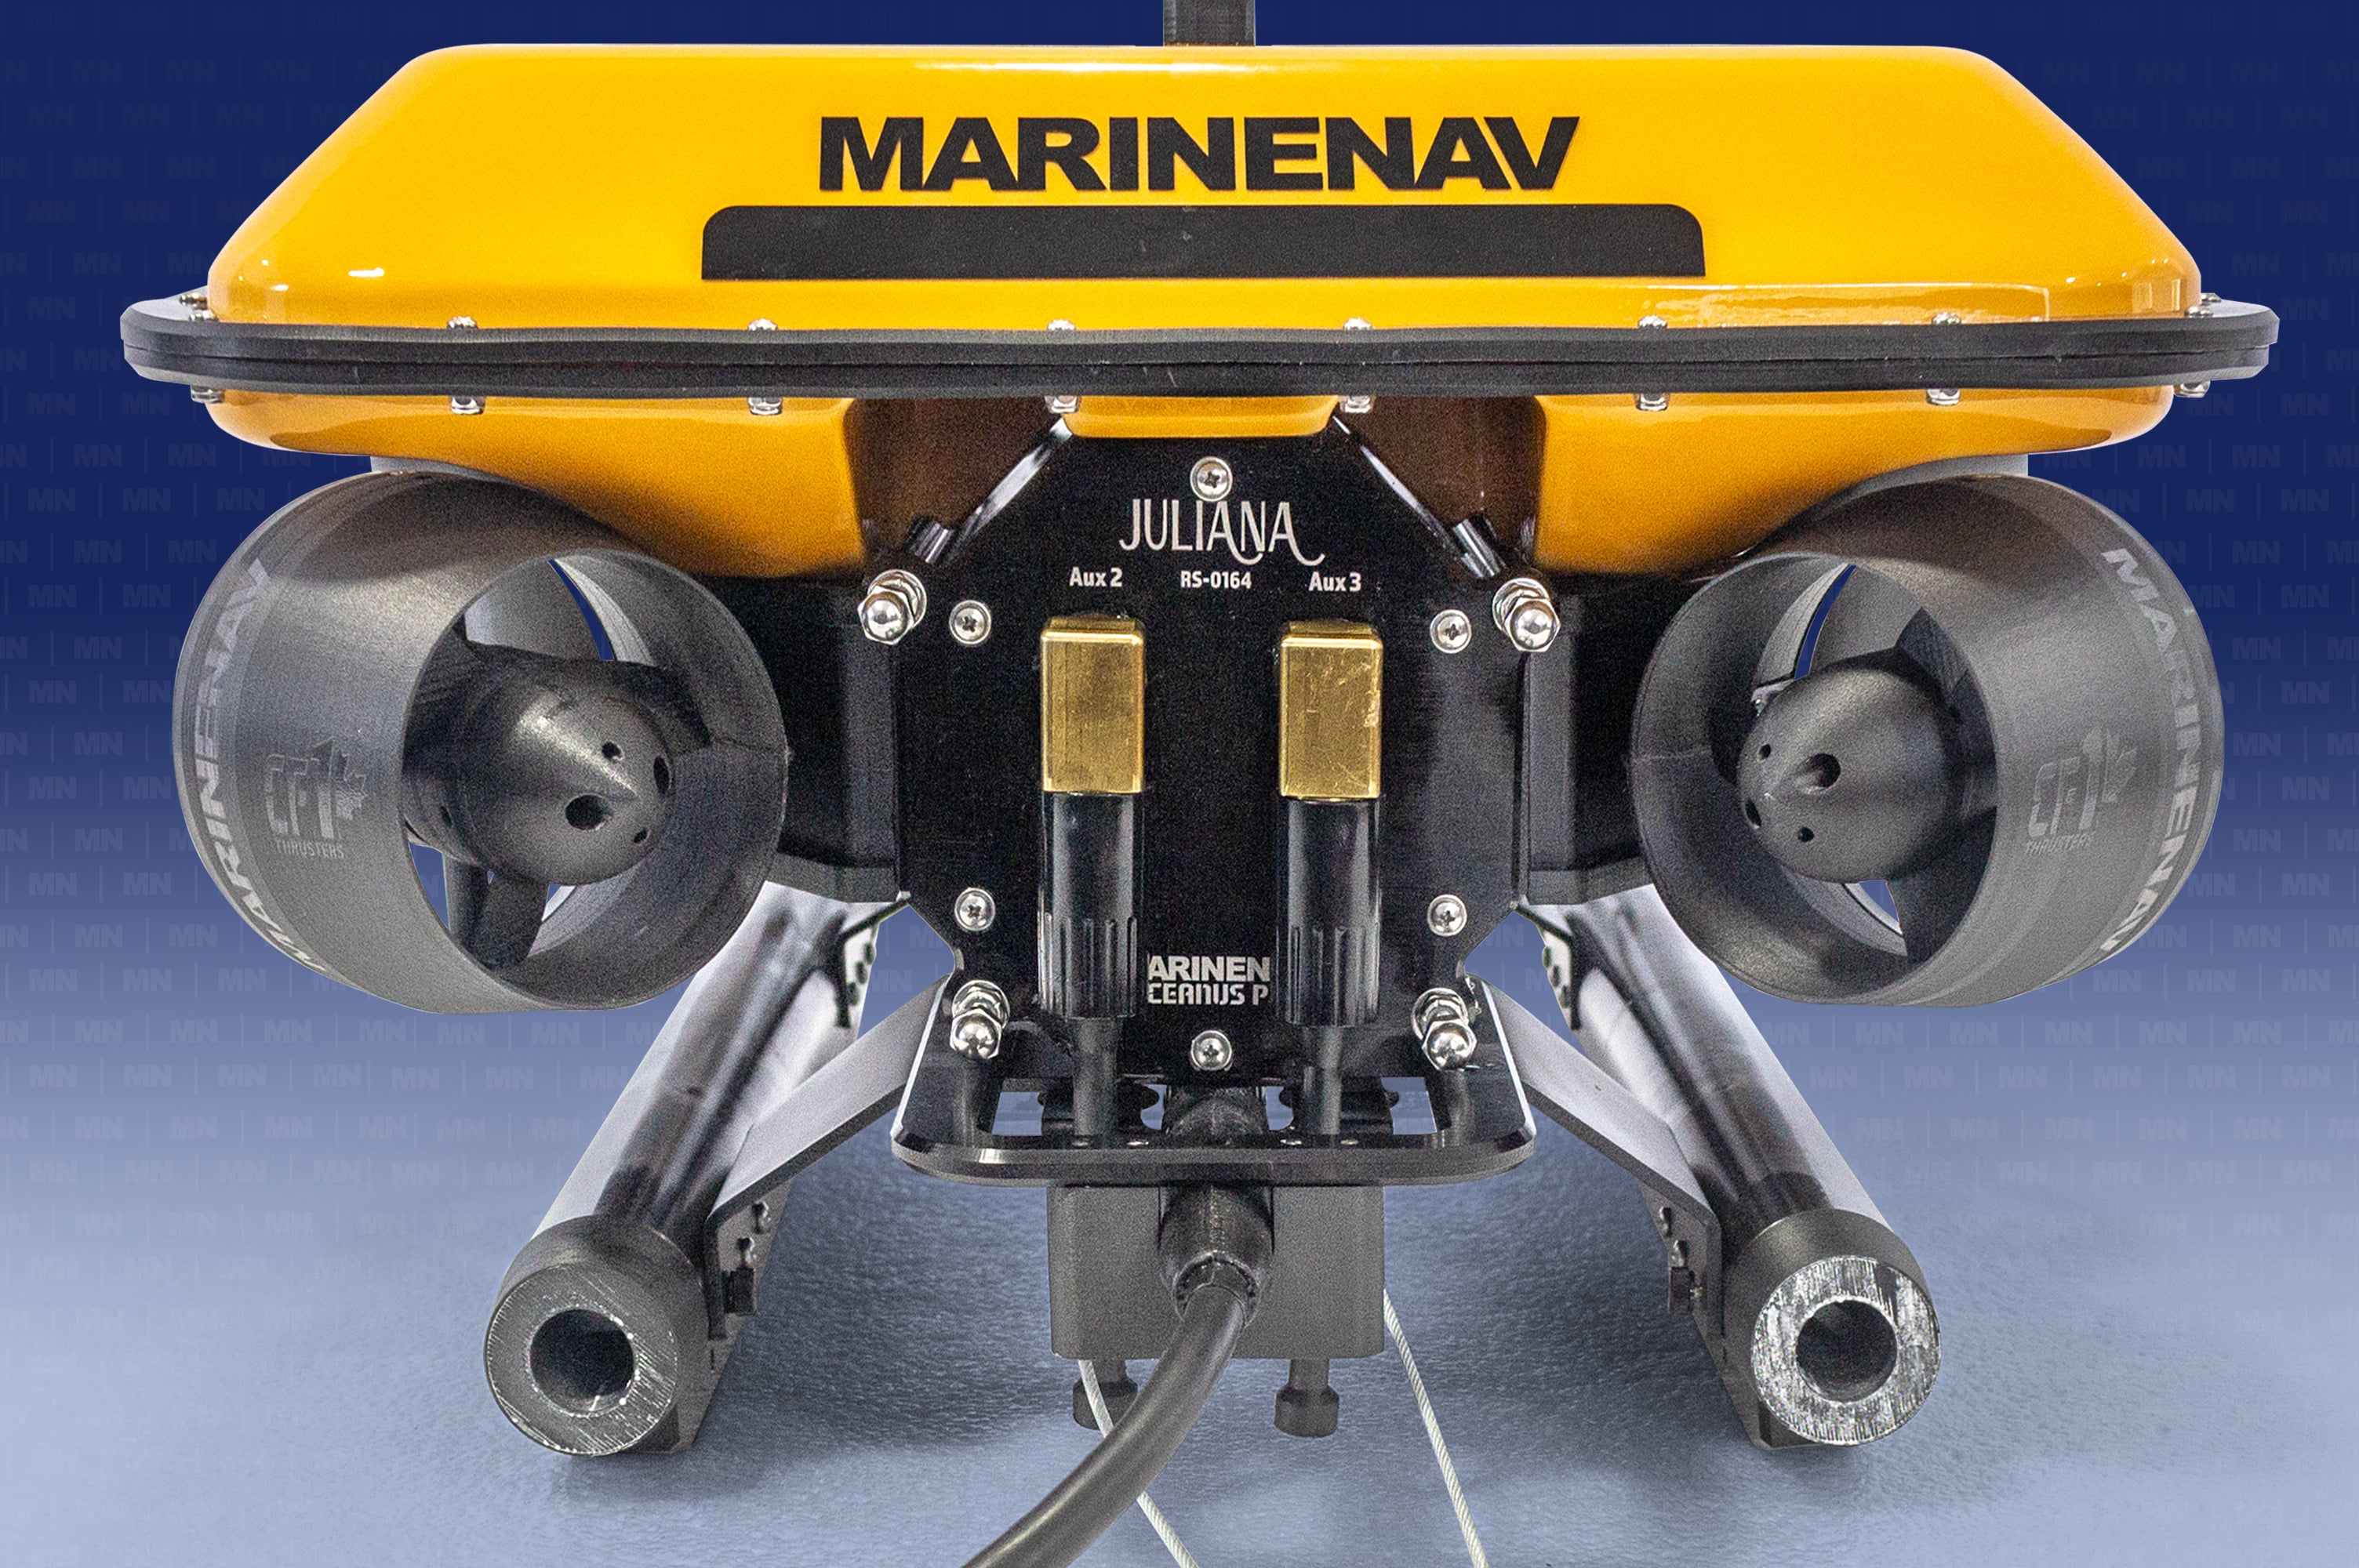 ROV auxiliary ports provide flexible options to accessorize your ROV